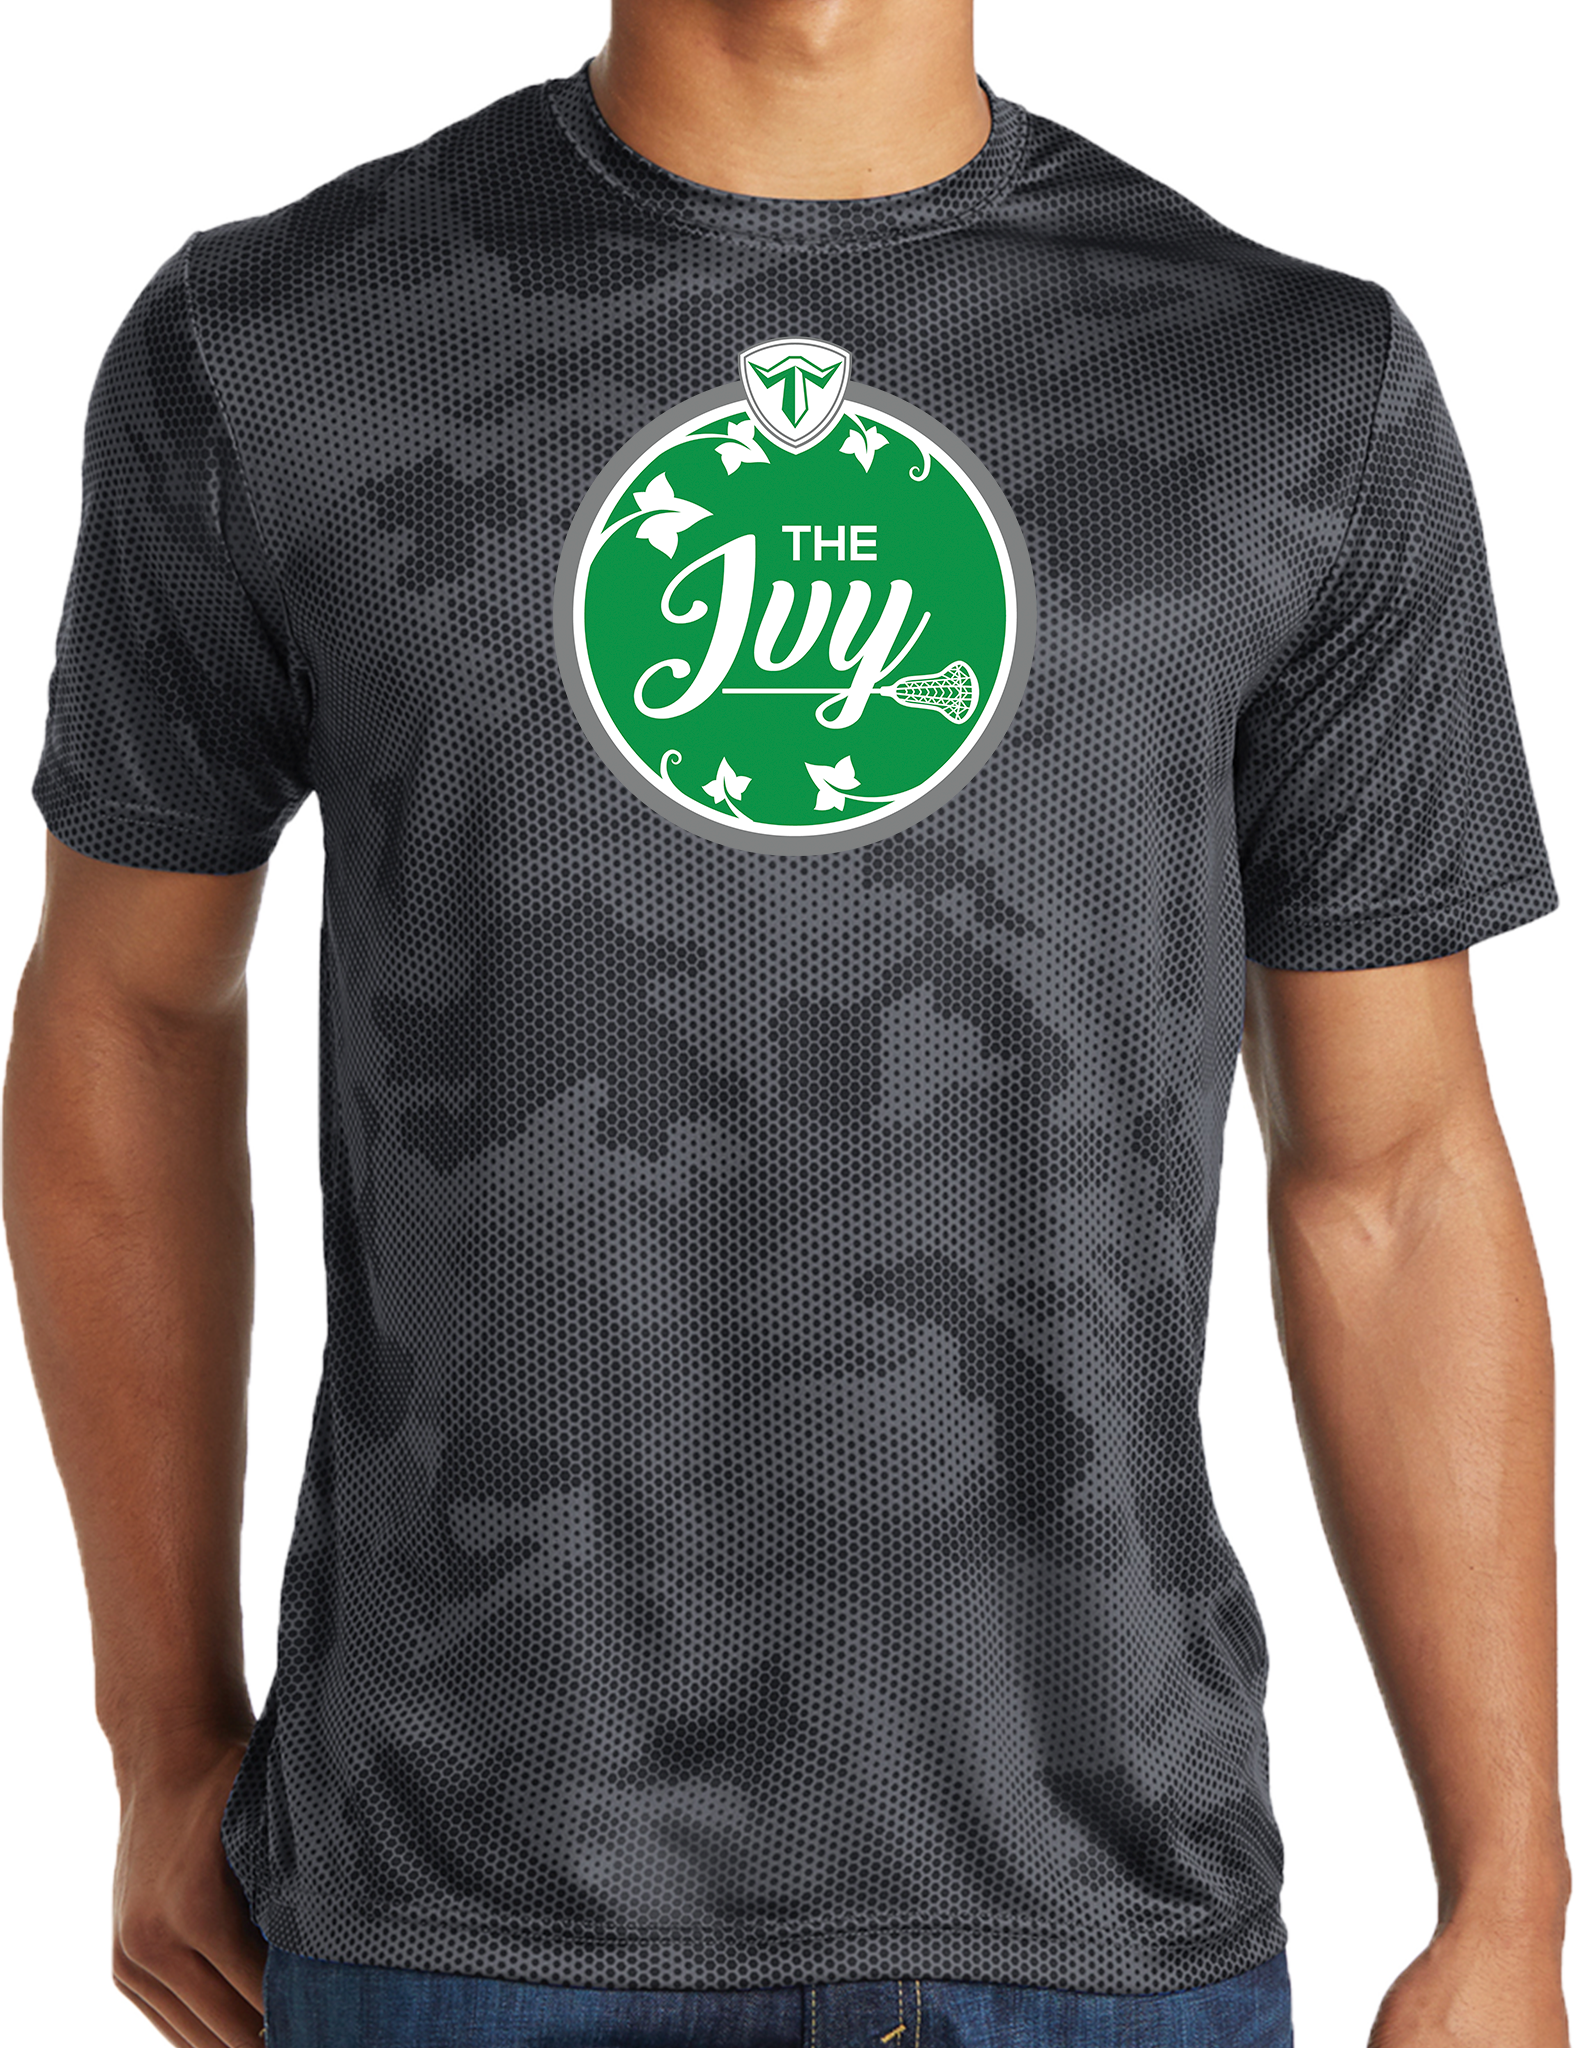 PERFORMANCE SHIRTS - 2023 The Ivy